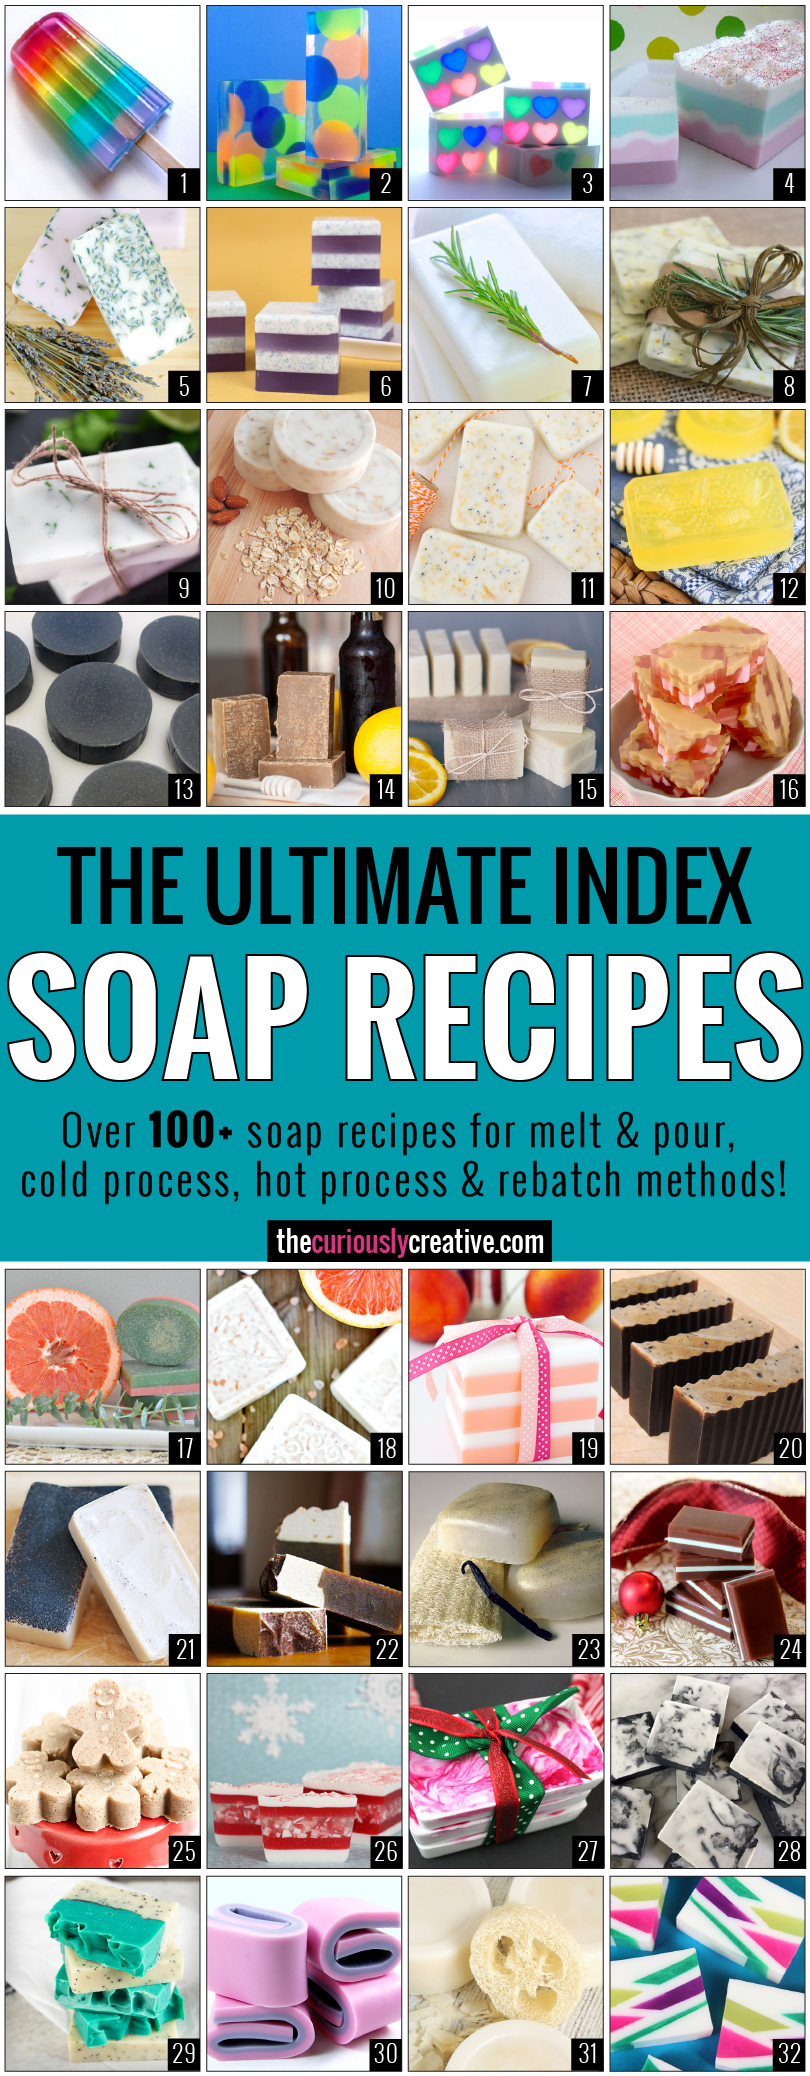 The Ultimate Soap Making Recipe Index – Includes over 100 soap recipes for melt & pour, cold process and hot process methods.